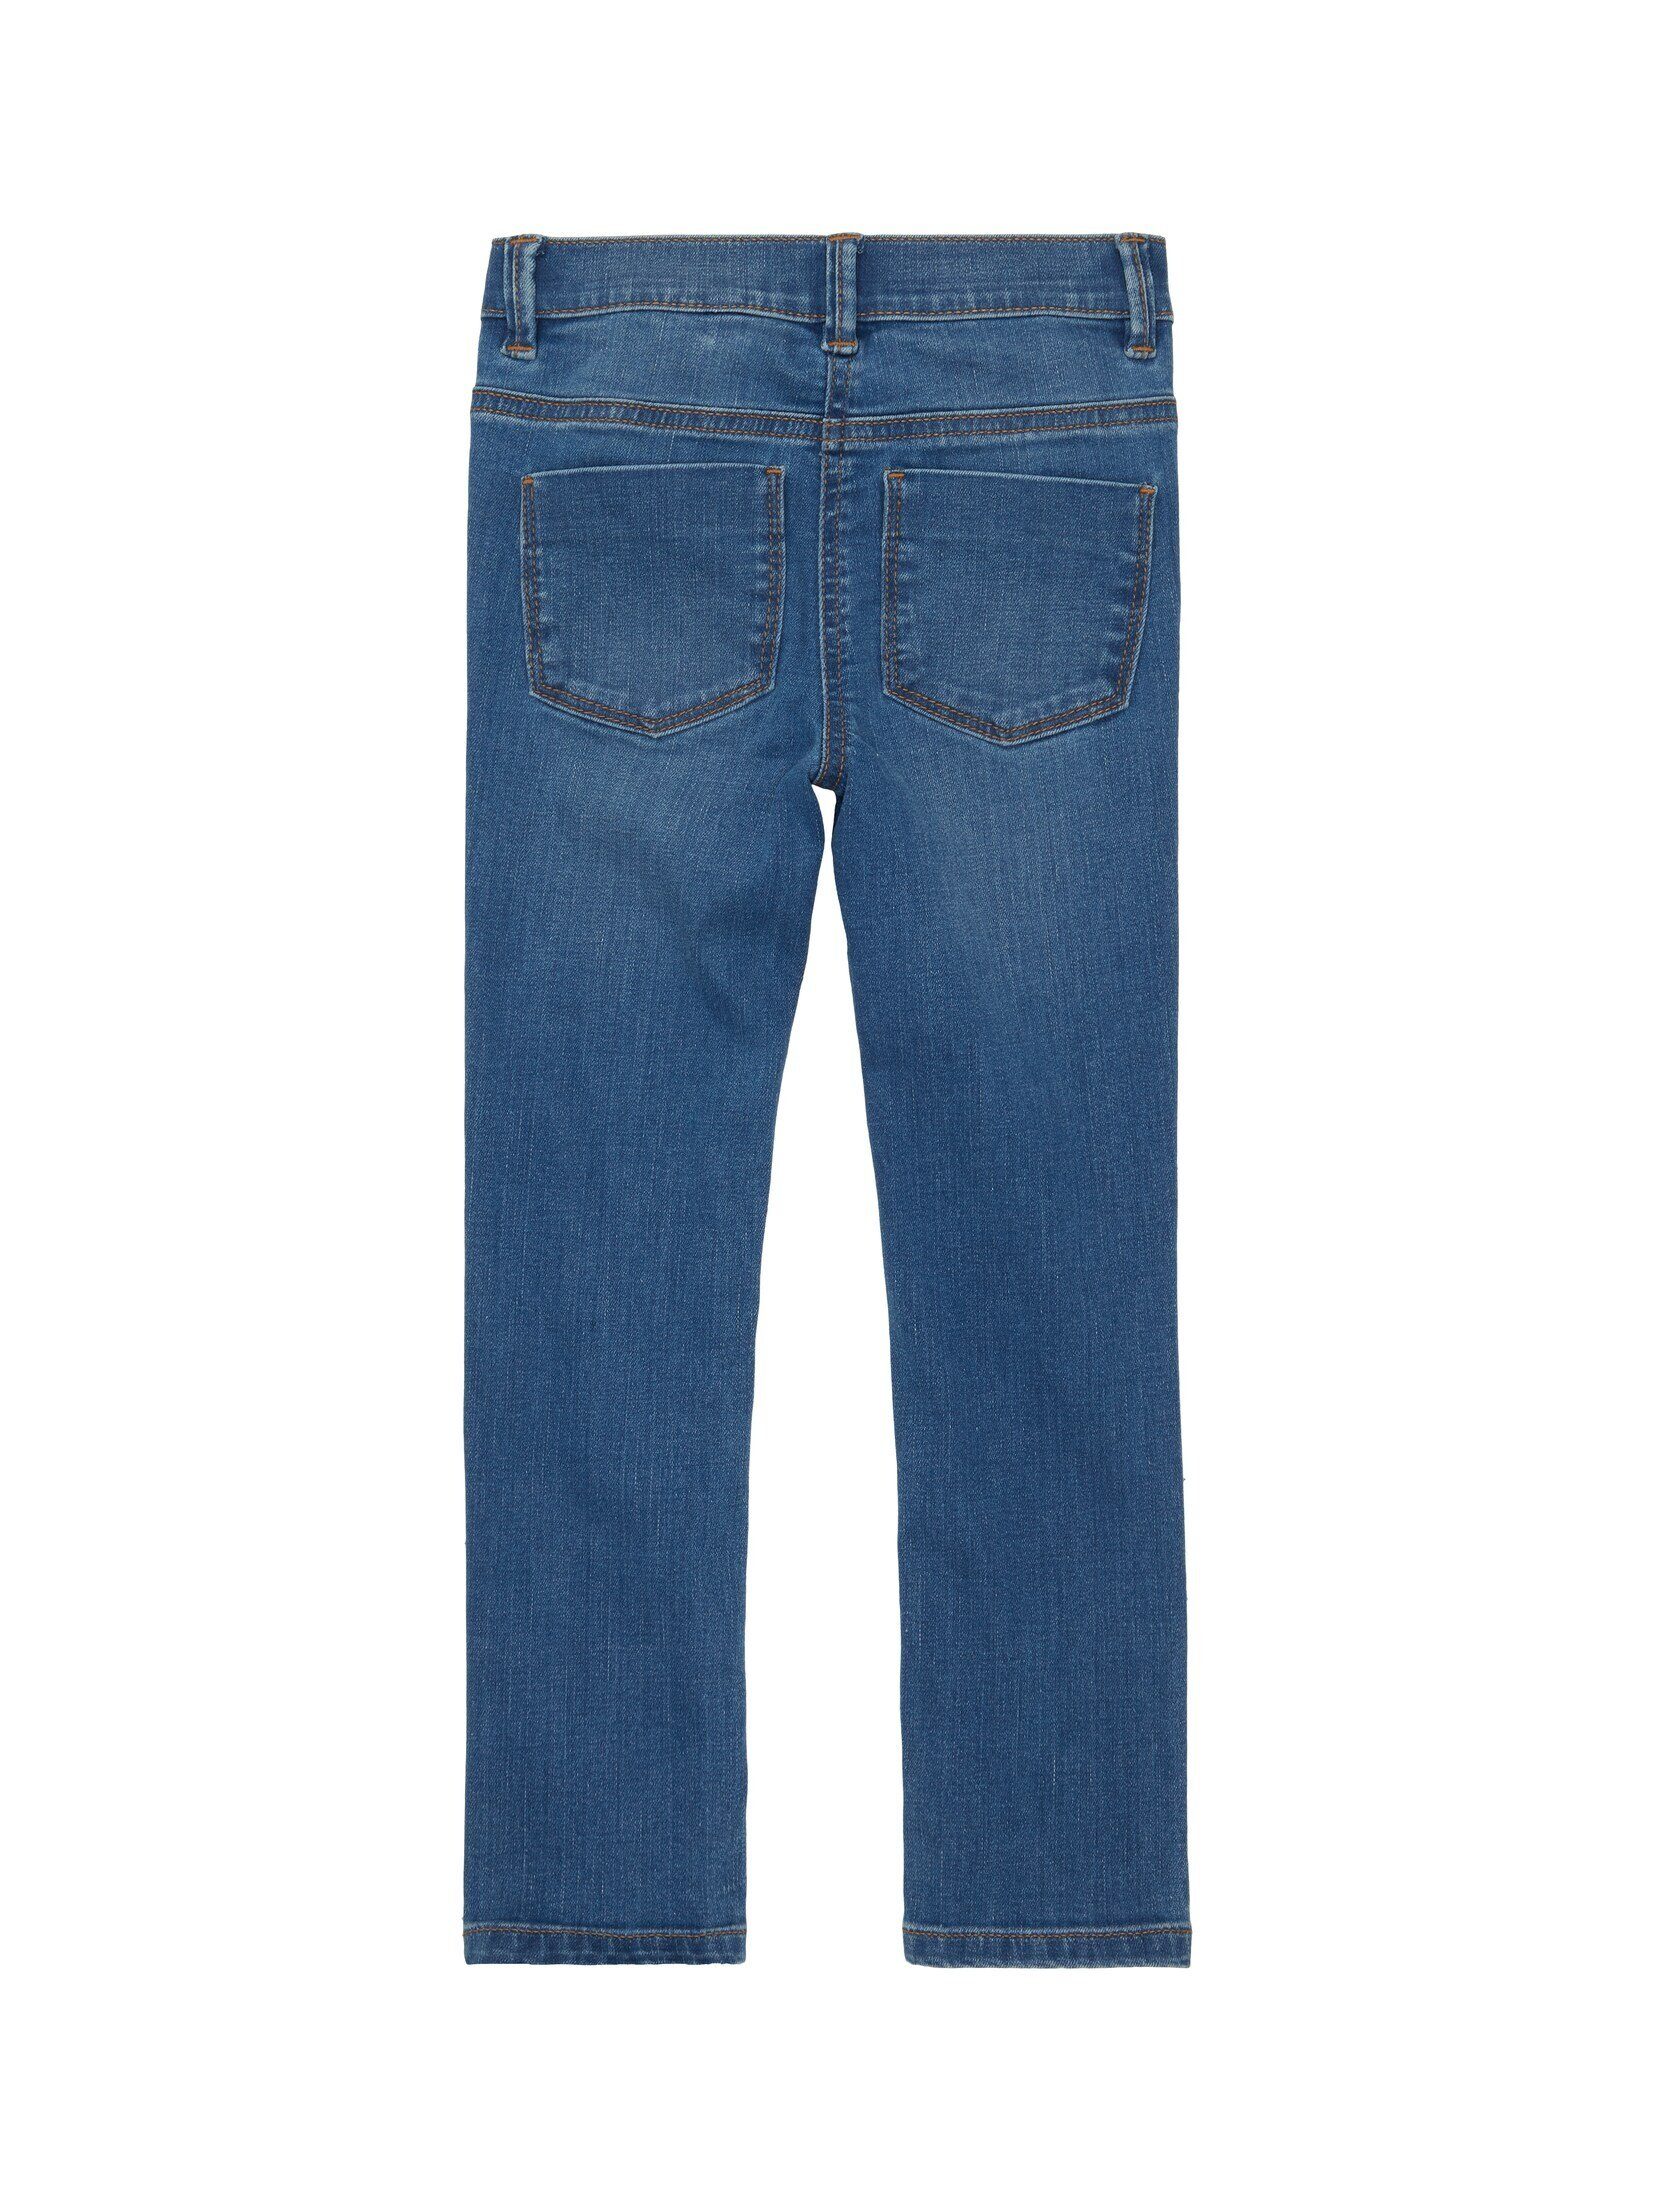 TOM TAILOR mit Waschung leichter Ankle-Jeans Treggings